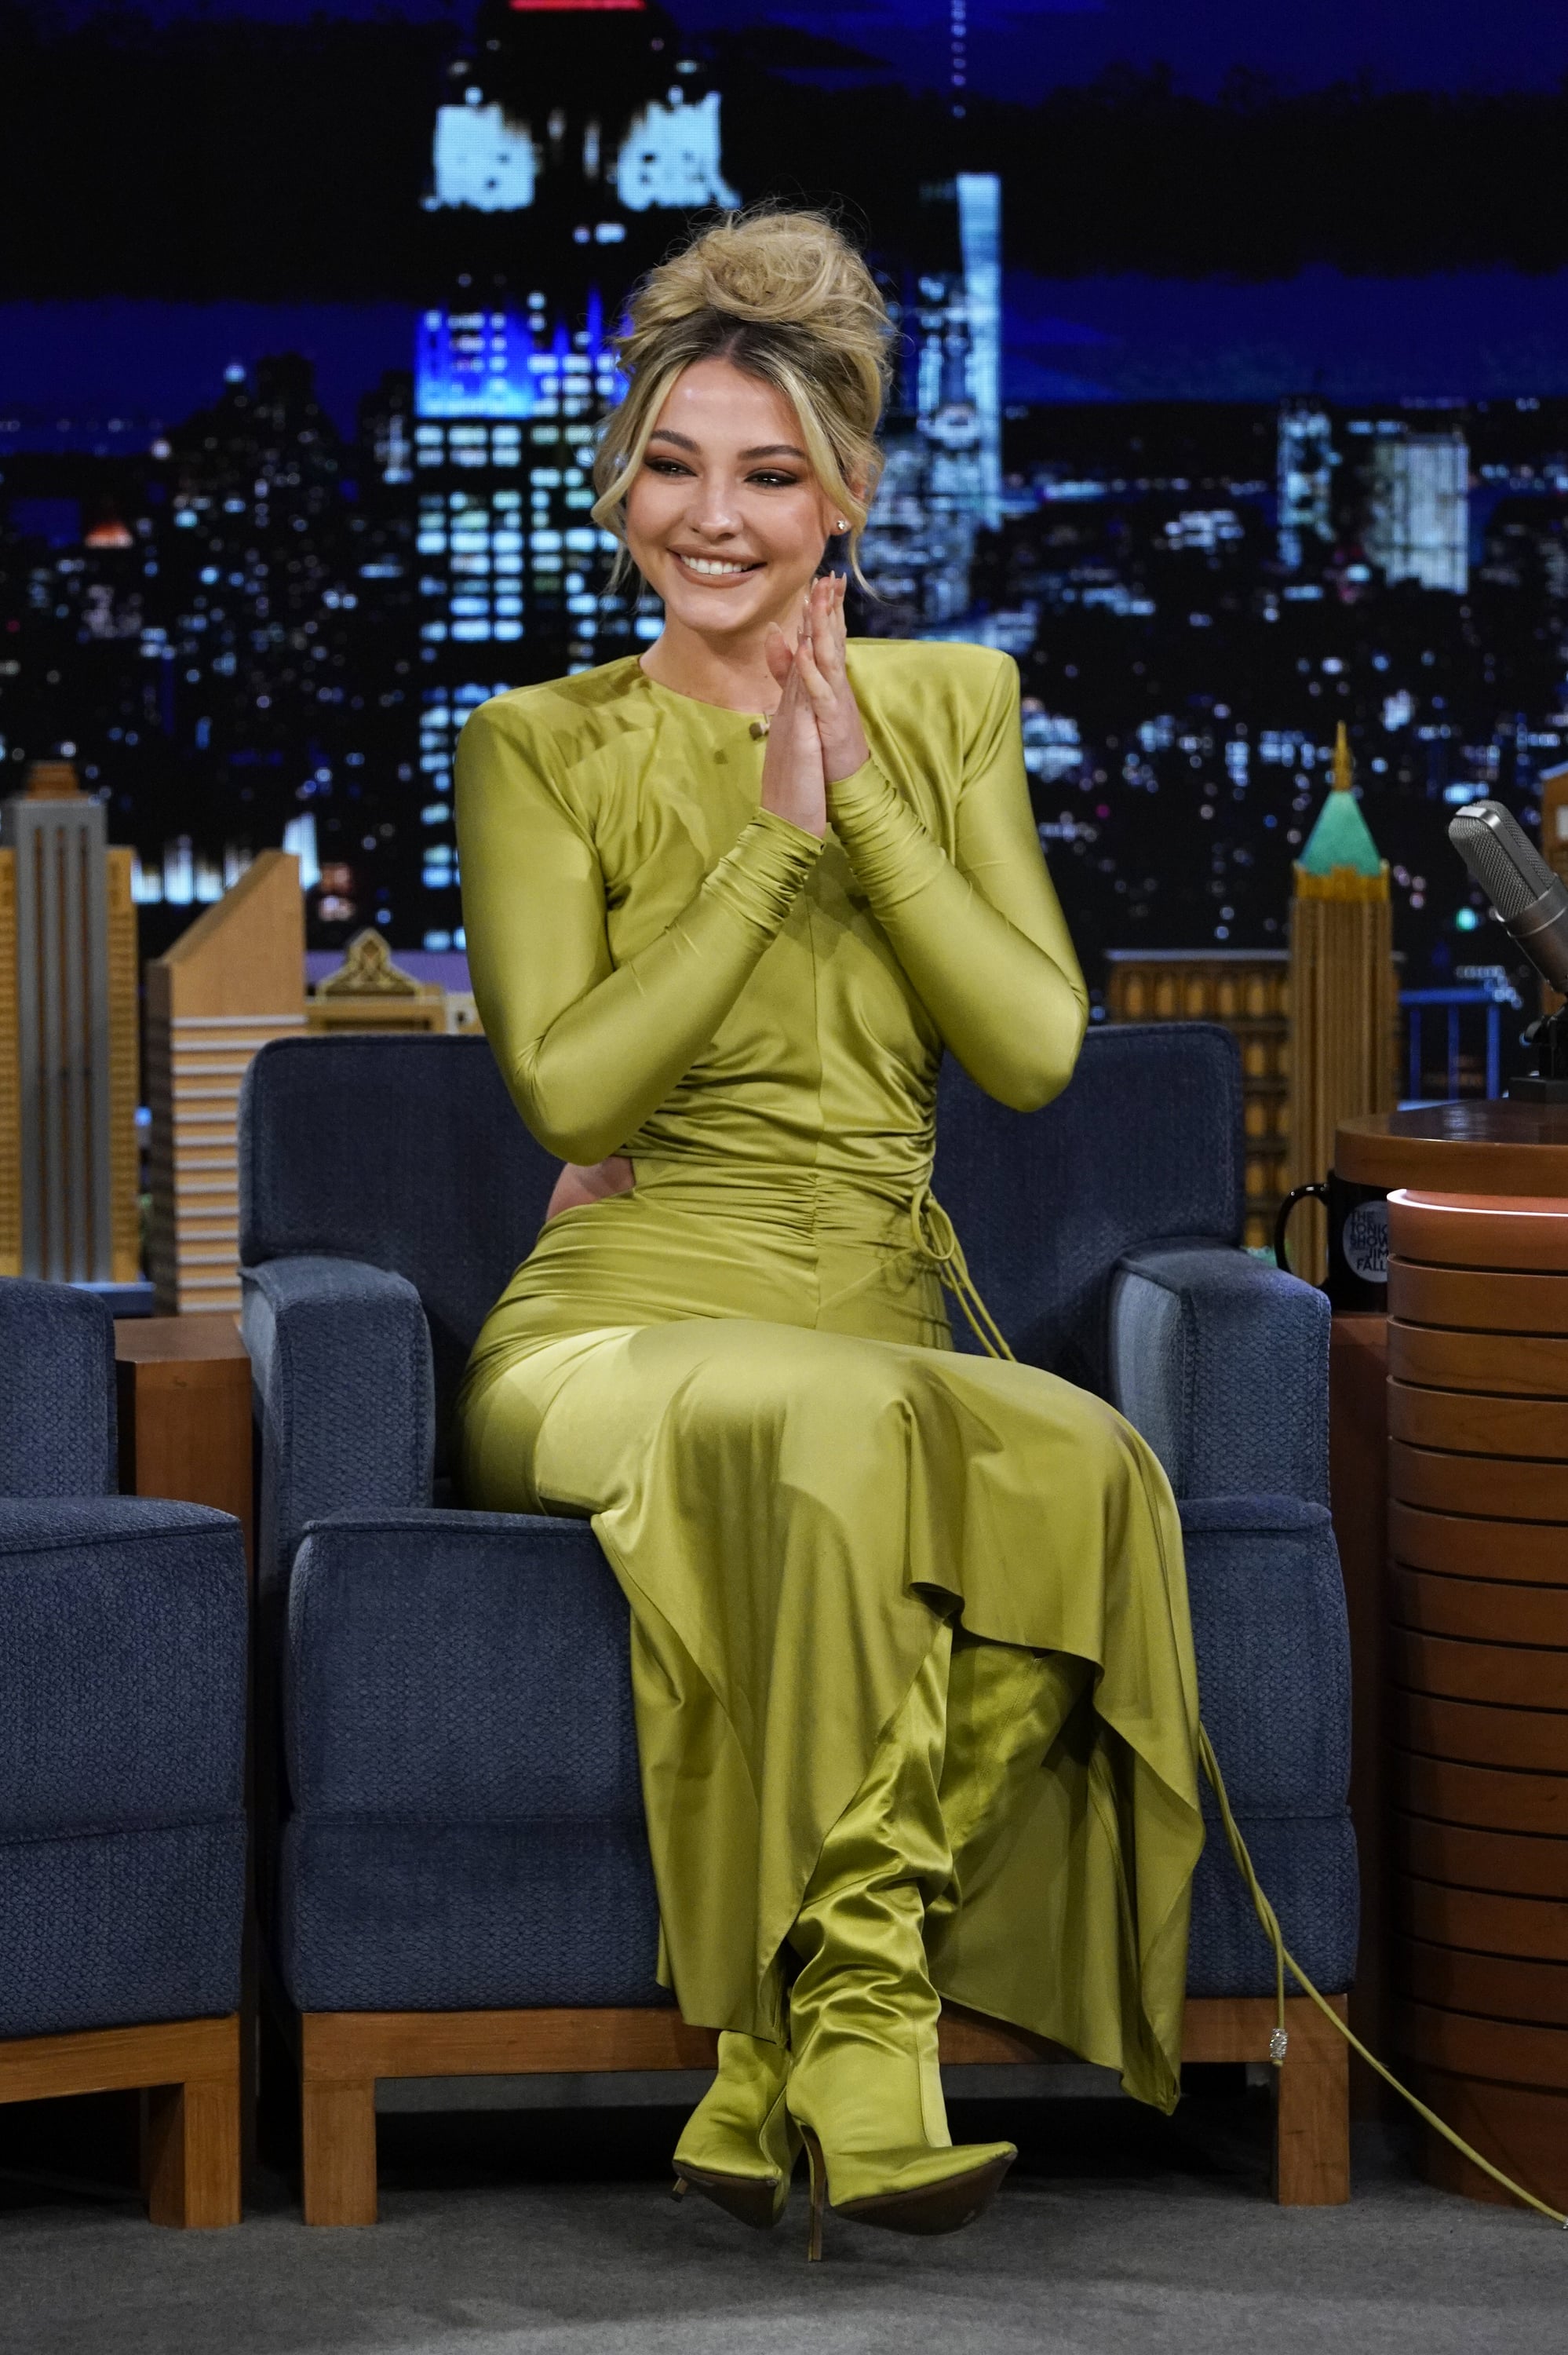 THE TONIGHT SHOW STARRING JIMMY FALLON -- Episode 1752 -- Pictured: Actress Madelyn Cline during an interview on Wednesday, November 23, 2022 -- (Photo by: Rosalind OConnor/NBC via Getty Images)